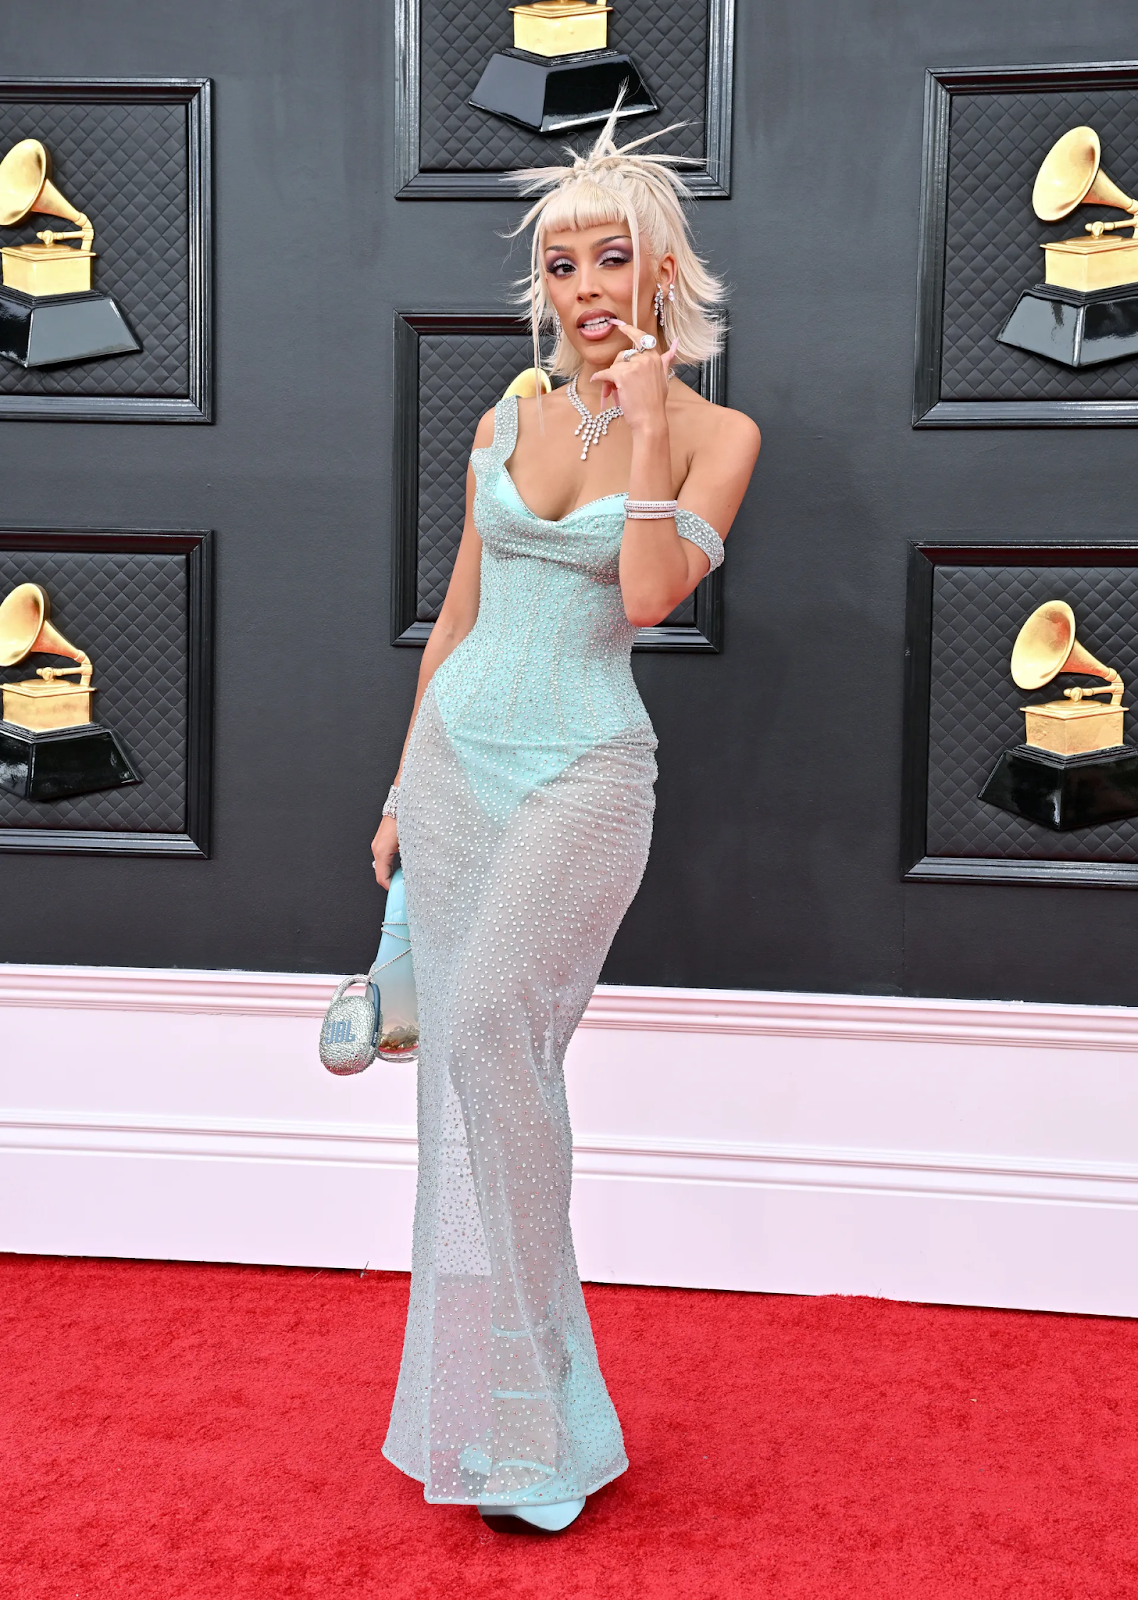 A woman in a sheer dress on the Grammy Awards red carpet